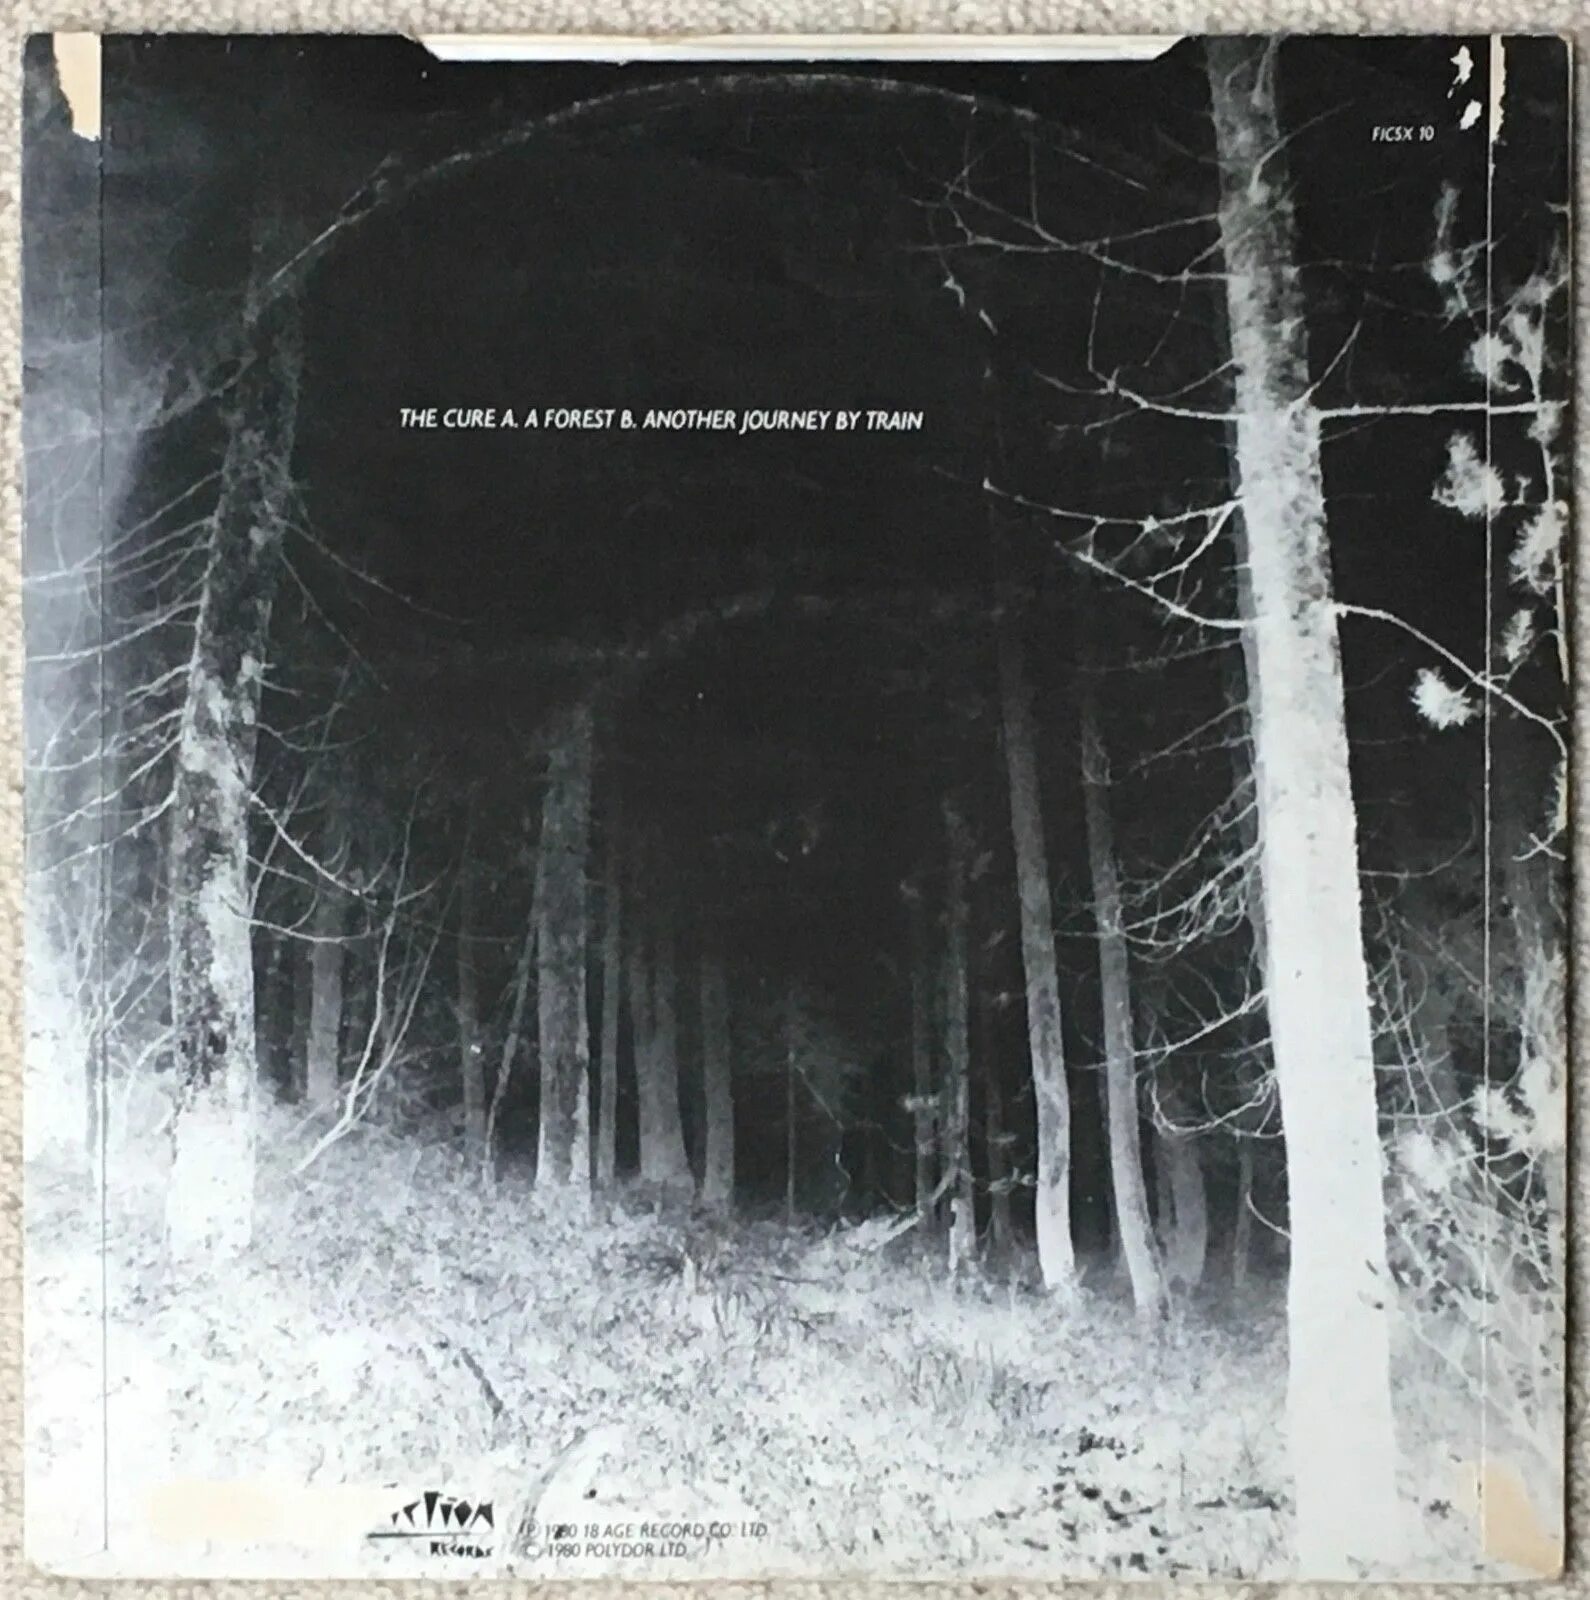 The cure forest. The Cure a Forest. The Cure - a Forest 1980 альбом. Cure a Forest табы. The Cure Vinyl a Forest.